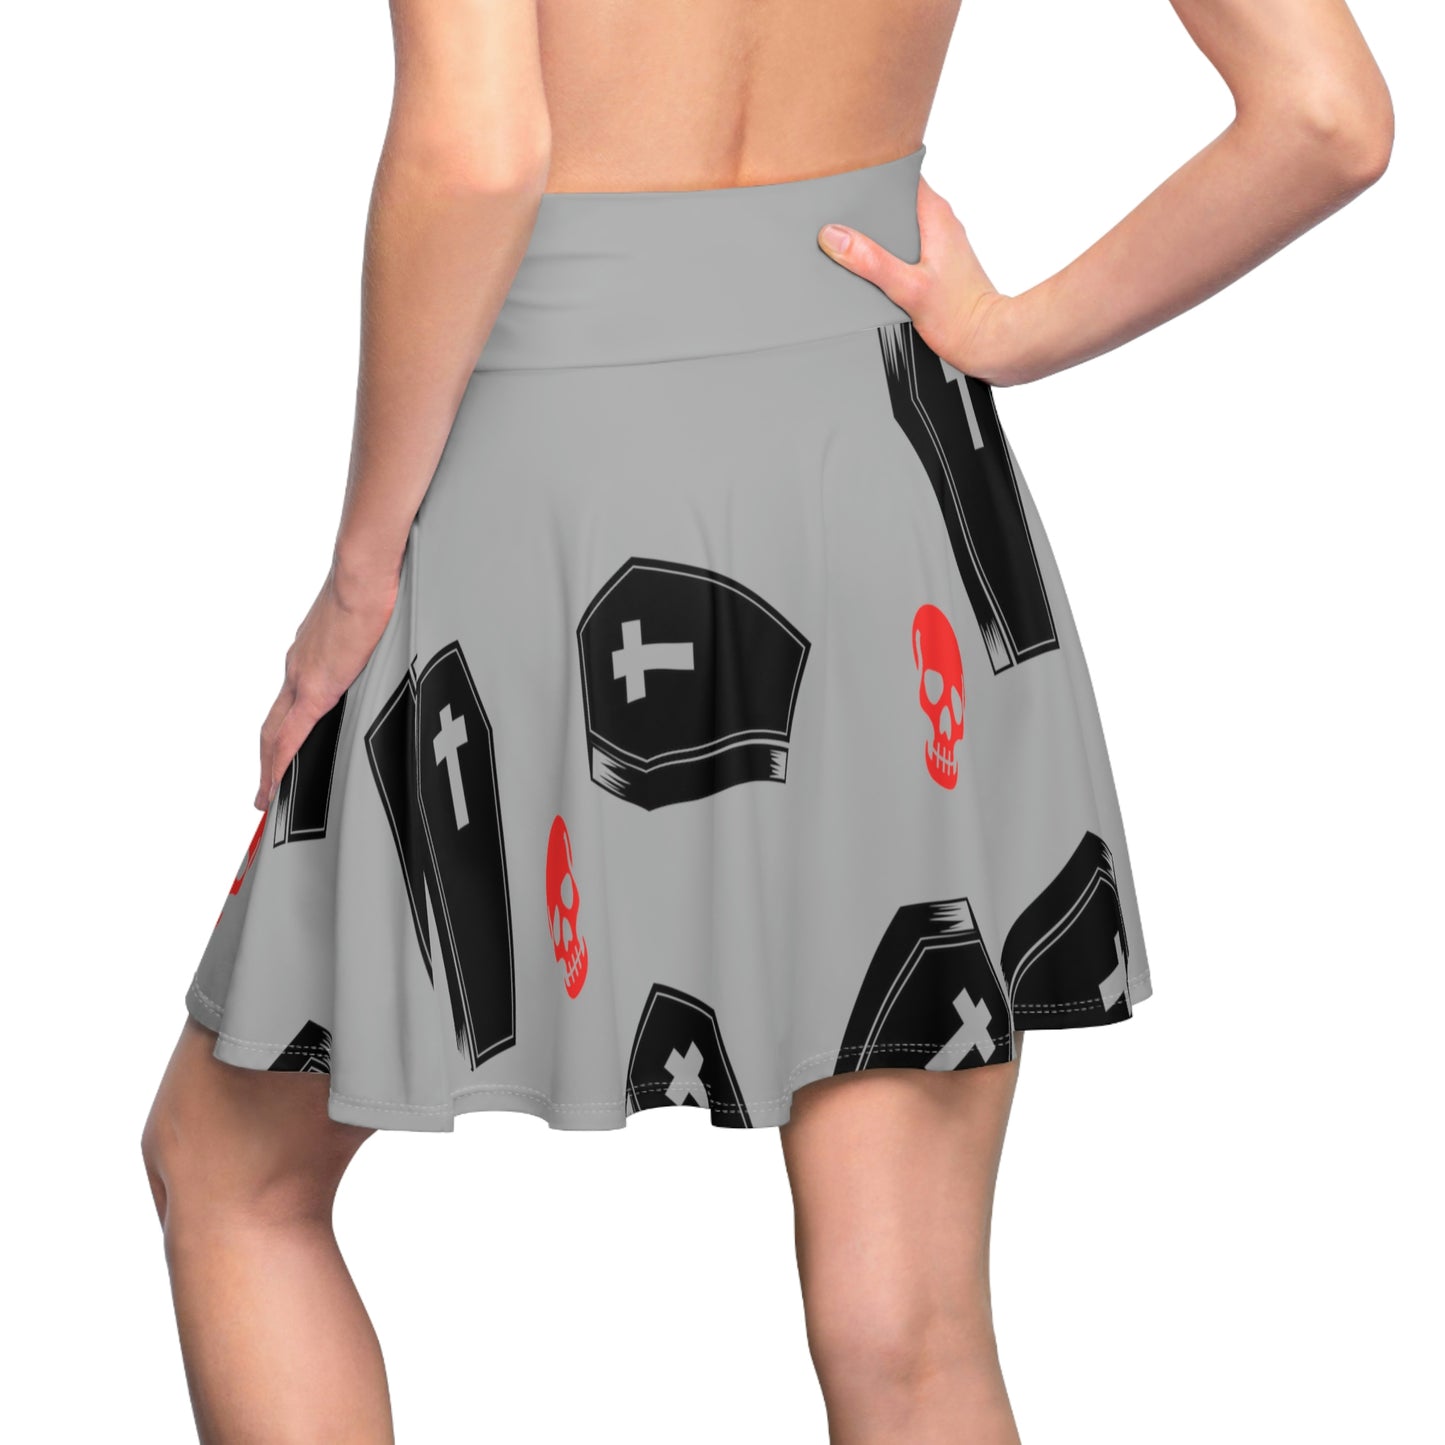 Coffin and Red Skull Skirt -(Large Print)